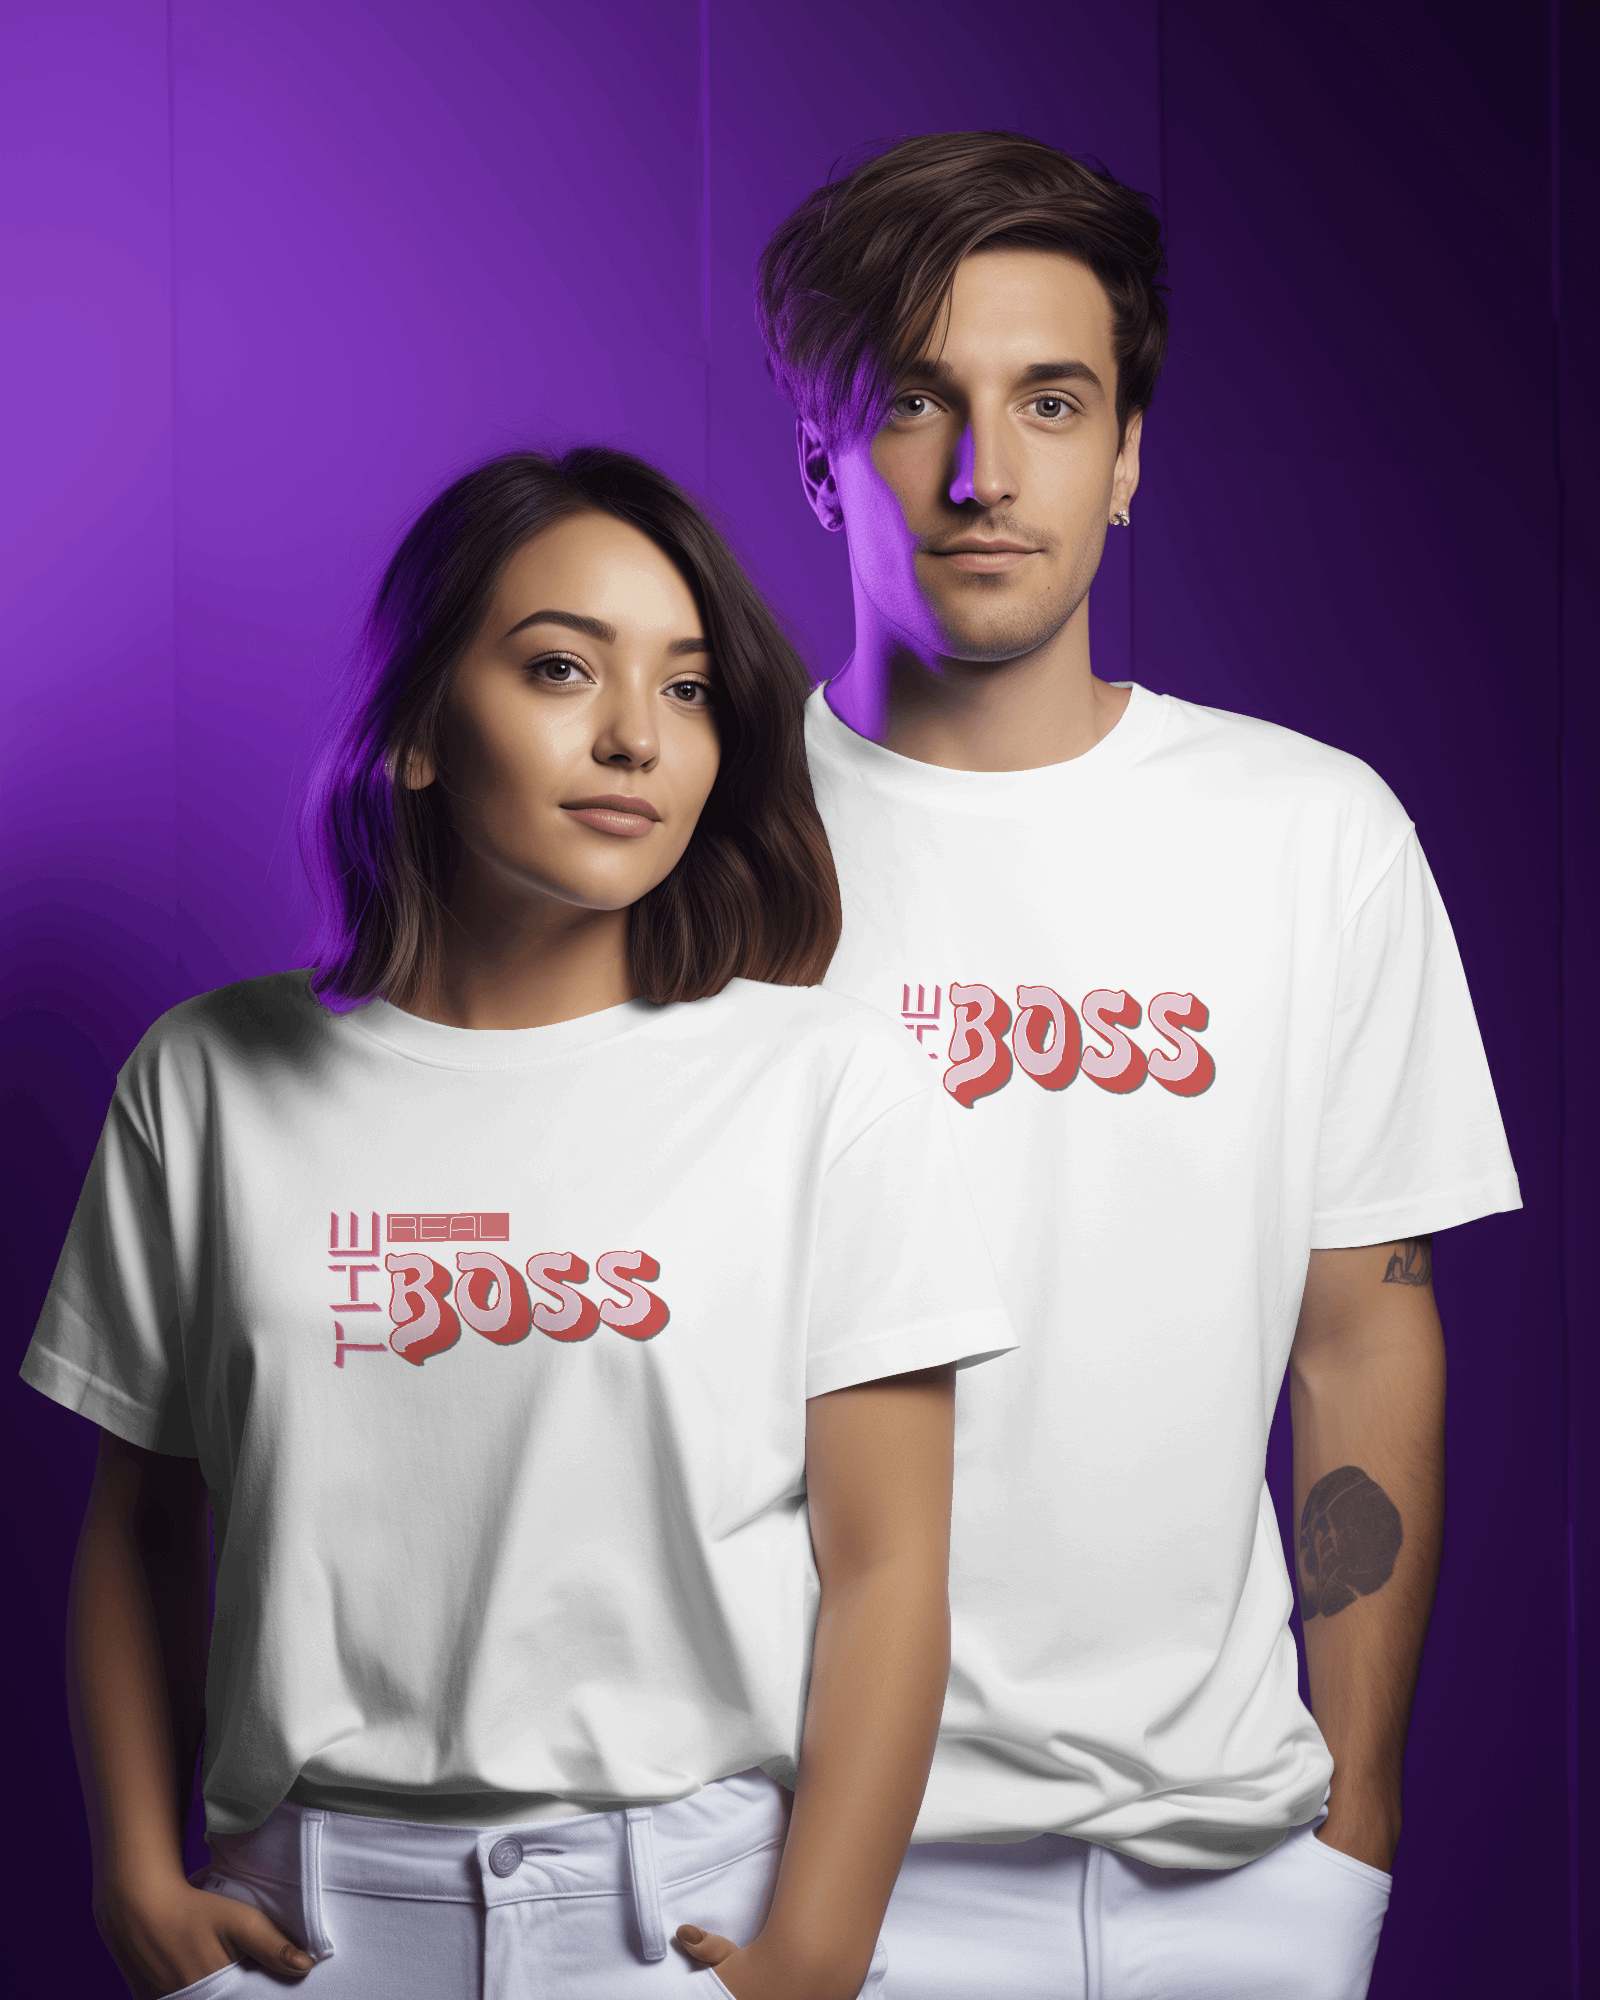 The boss Printed tshirt For Couple